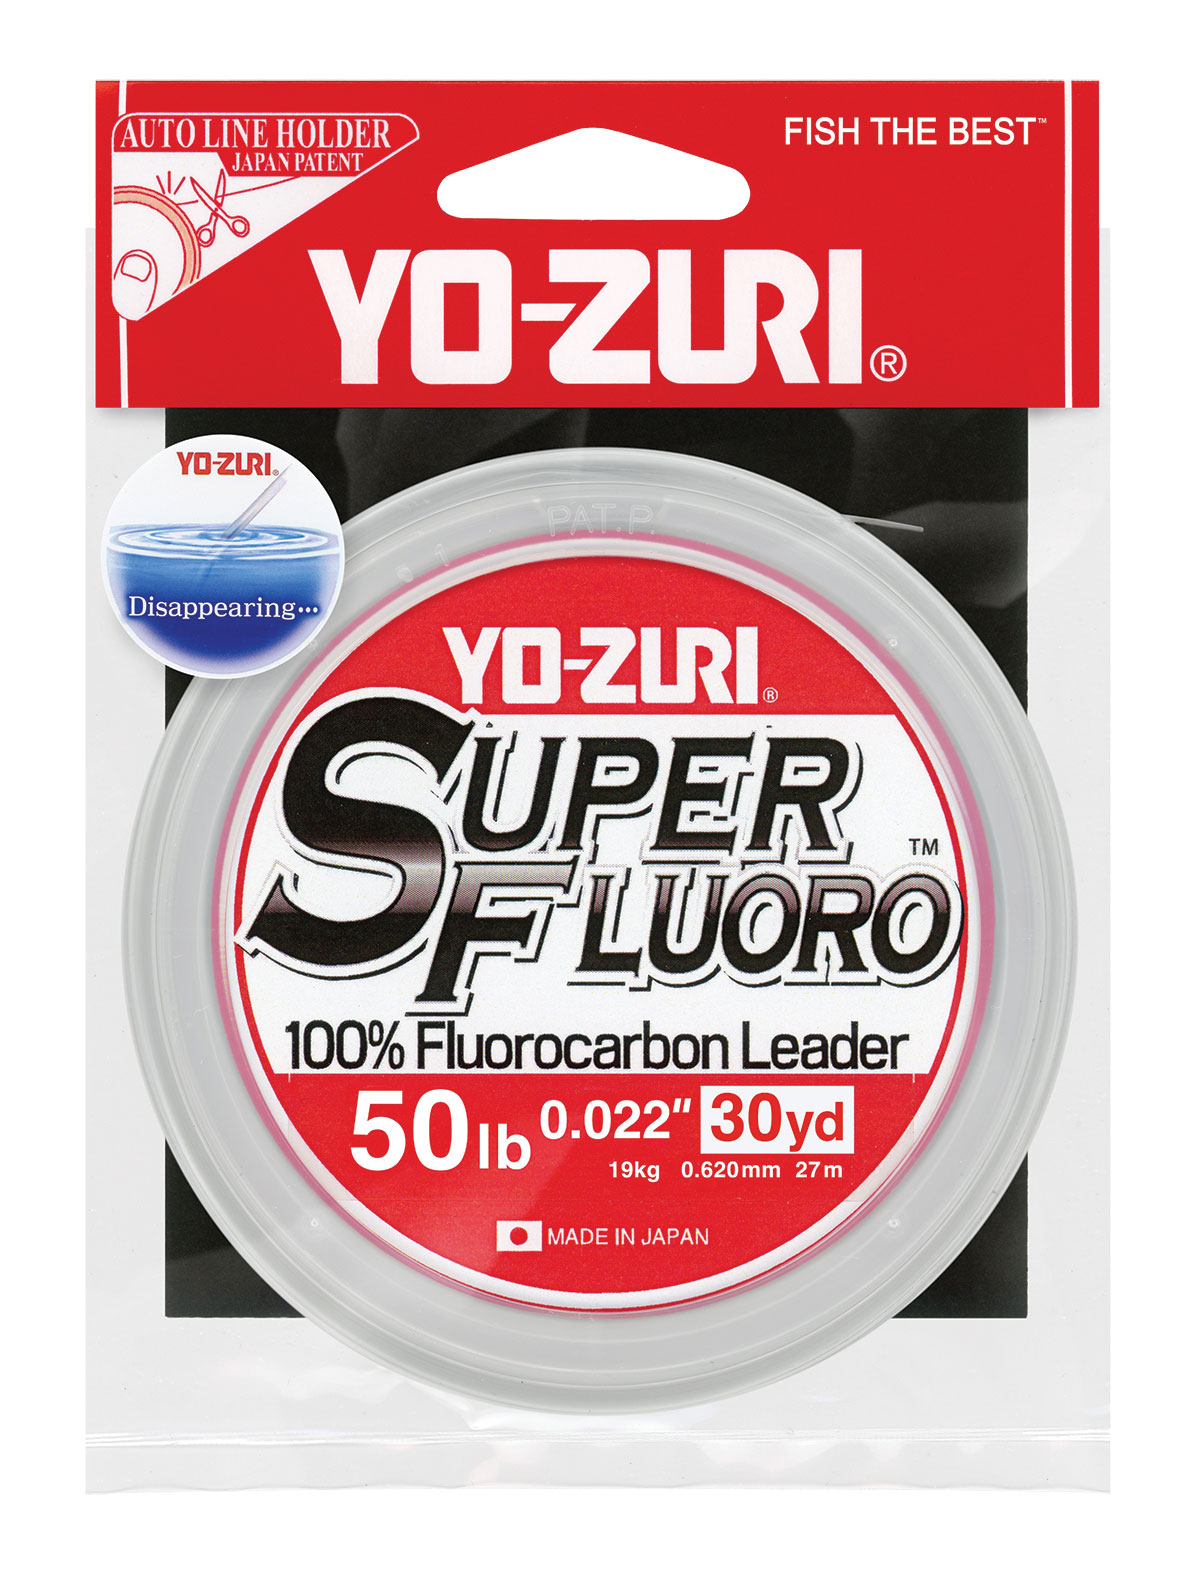 Vicious Fishing Crystal Clear 100% Japanese Fluorocarbon Fishing